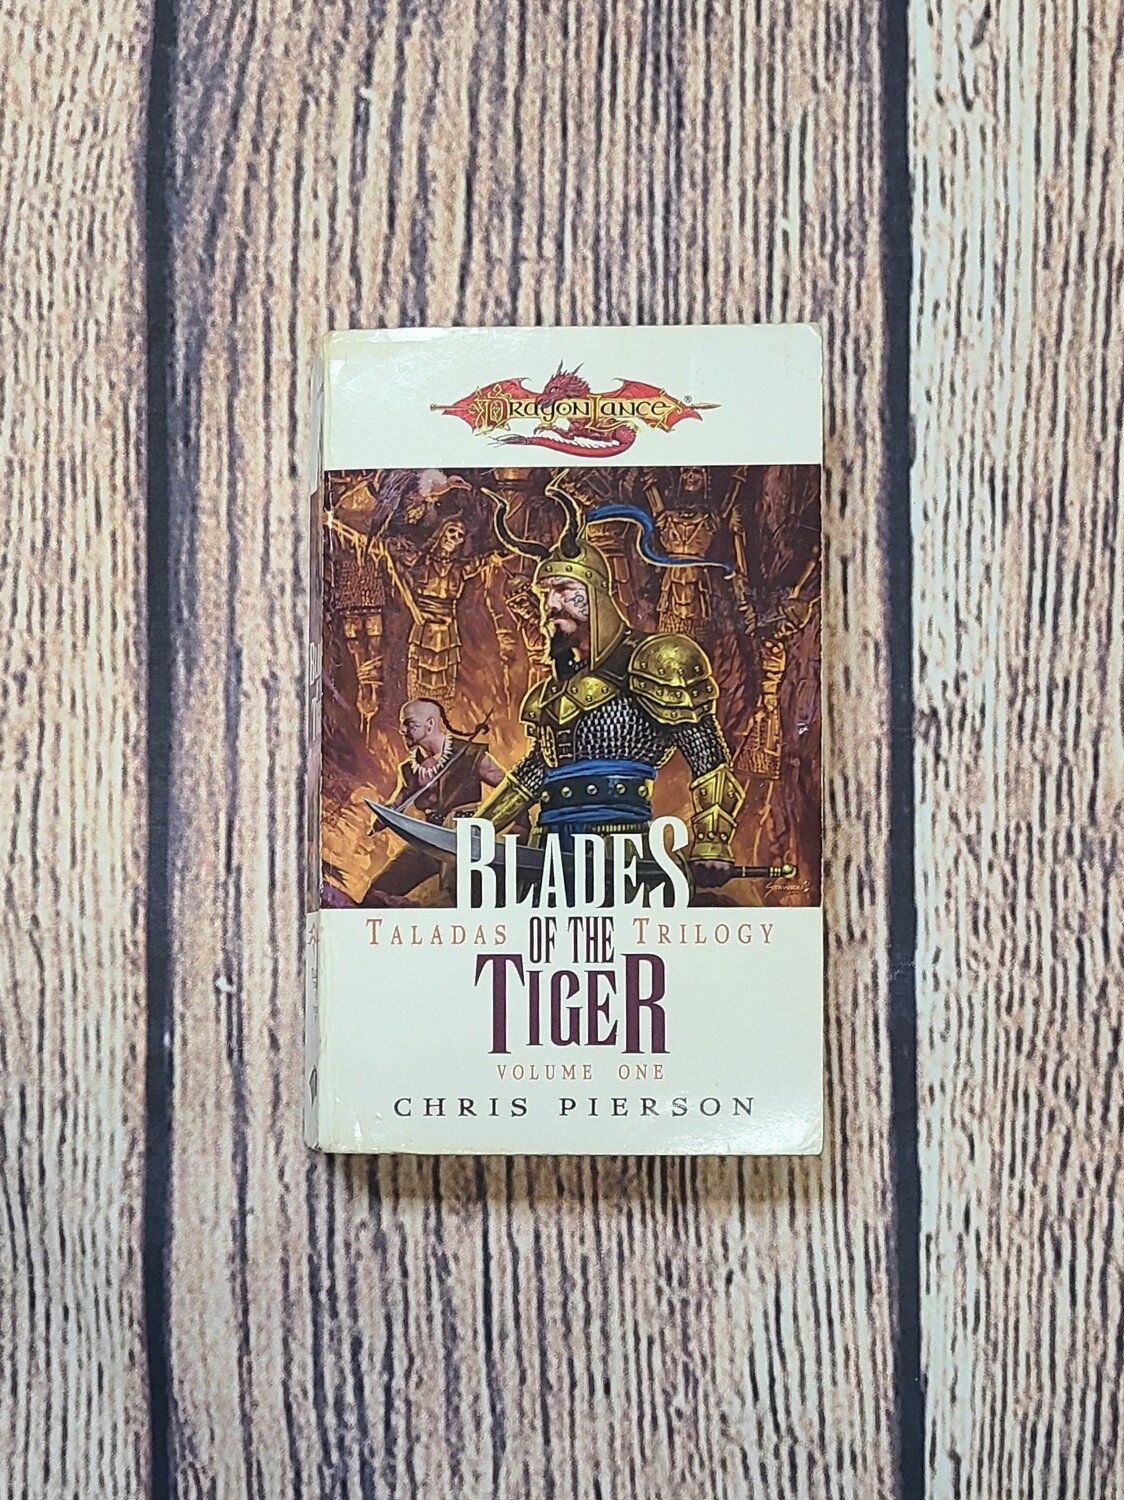 Dragon Lance: Blades of the Tiger by Chris Pierson